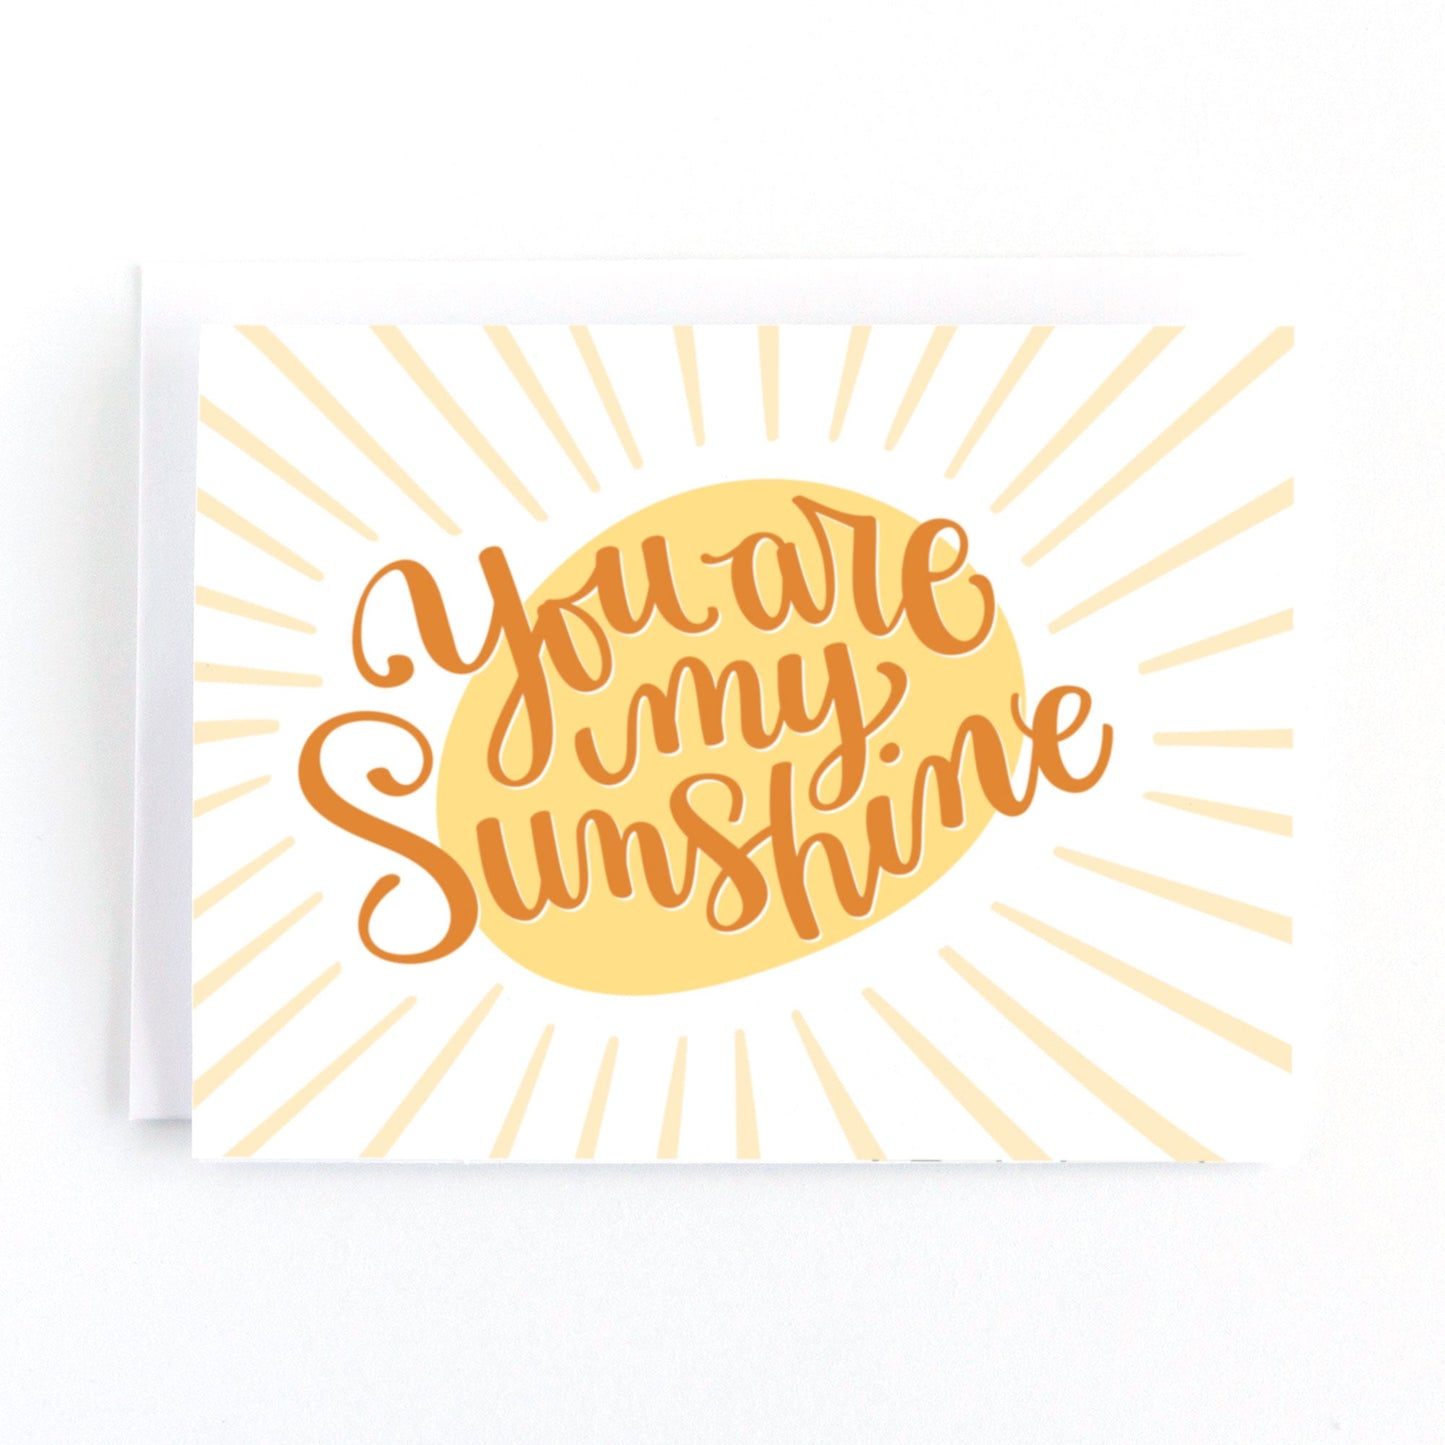 White and yellow greeting card with lettering that says you are my sunshine over top of a golden sun